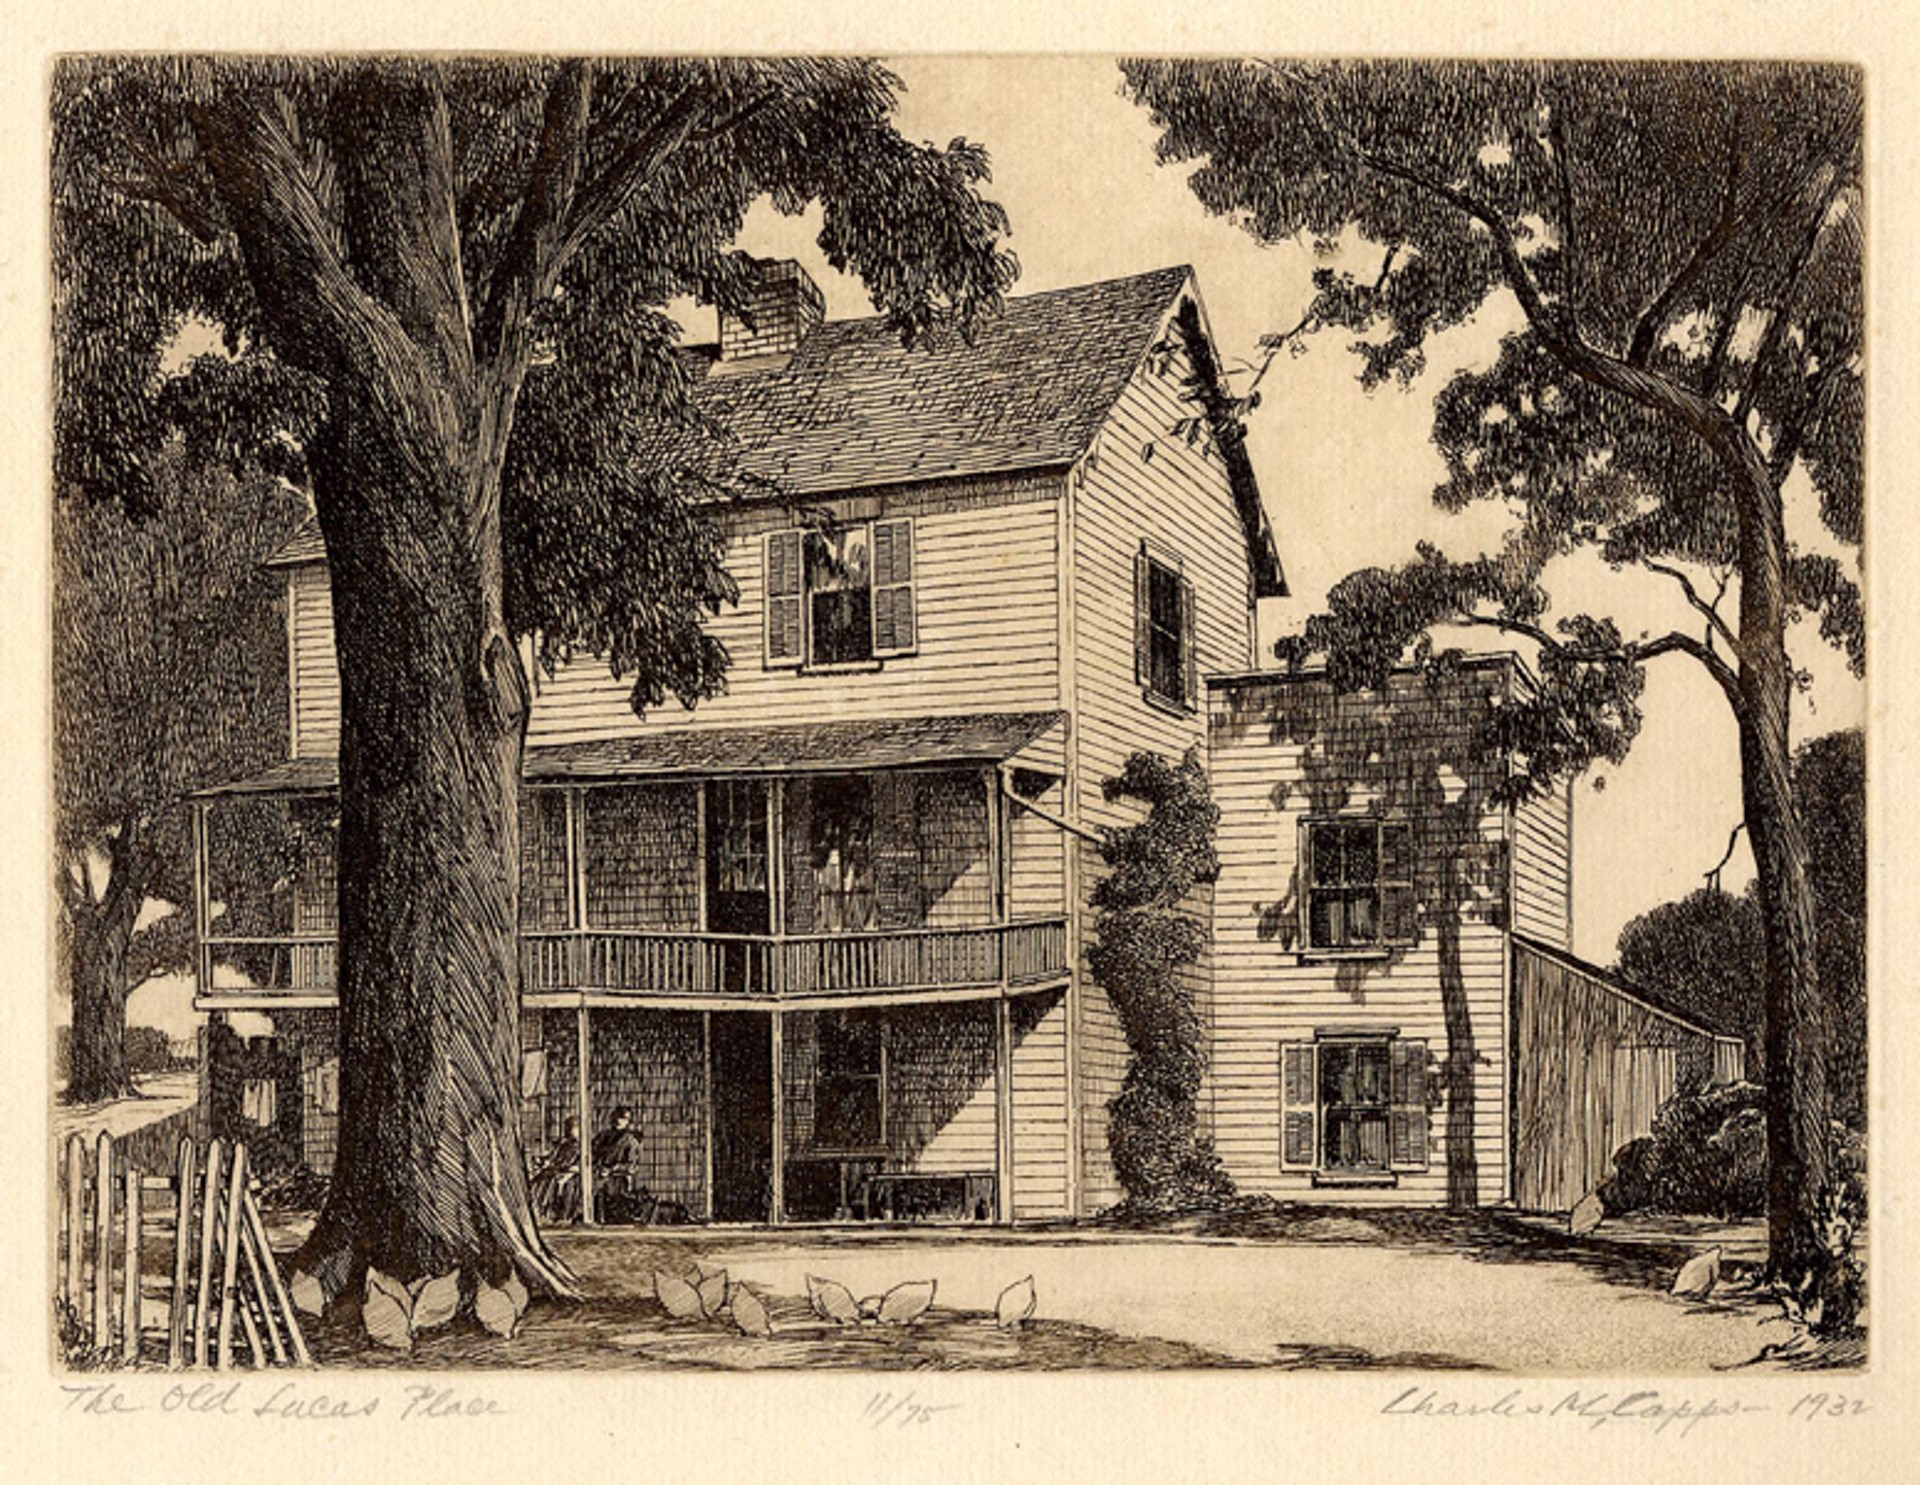 The Old Lucas Place by Charles M. Capps